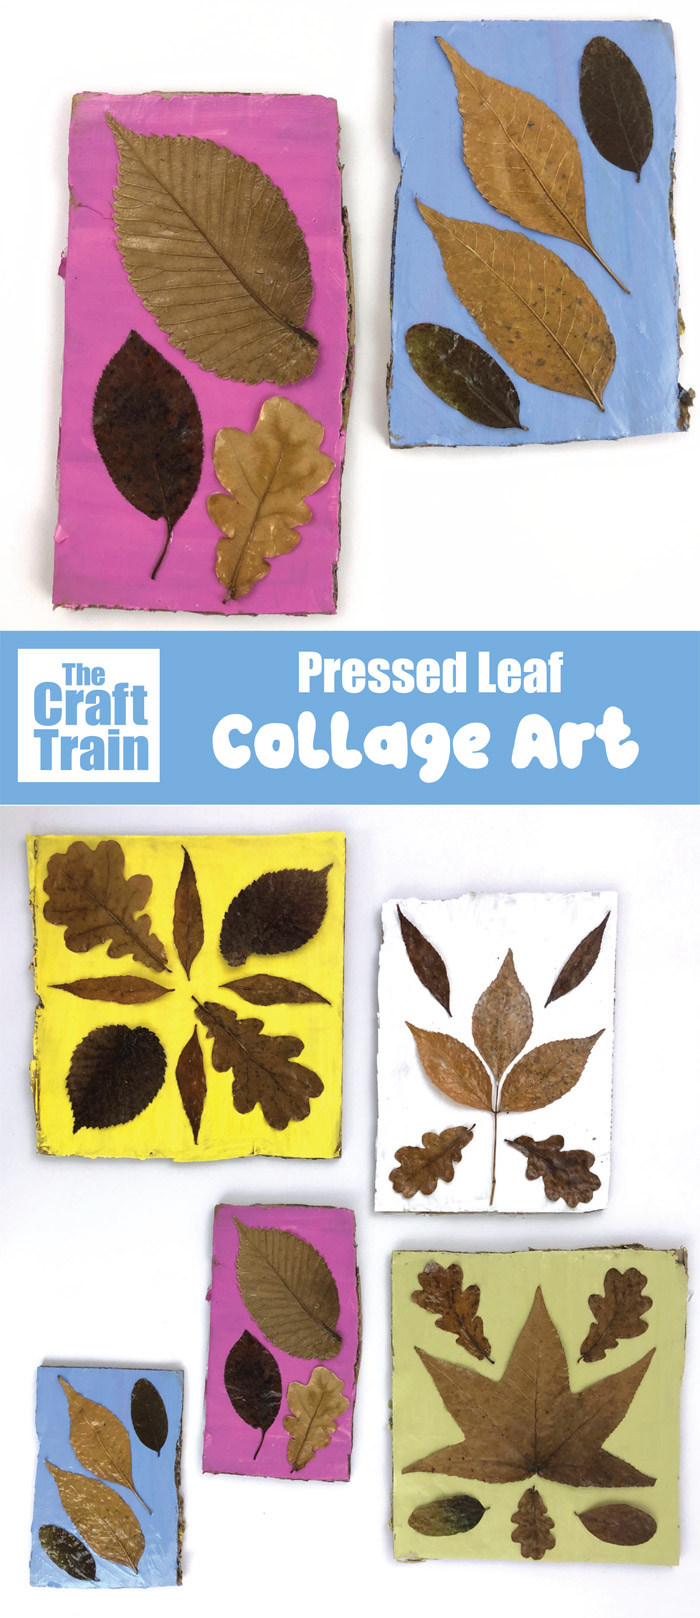 Pressed leaf wall art idea for kids. Create leaf artworks using leaves collected and pressed and arranged onto scrap pieces of cardboard which have been painted in bright colours #leafart #autumn #kidsart #pressedleaves #thecrafttrain #naturecrafts